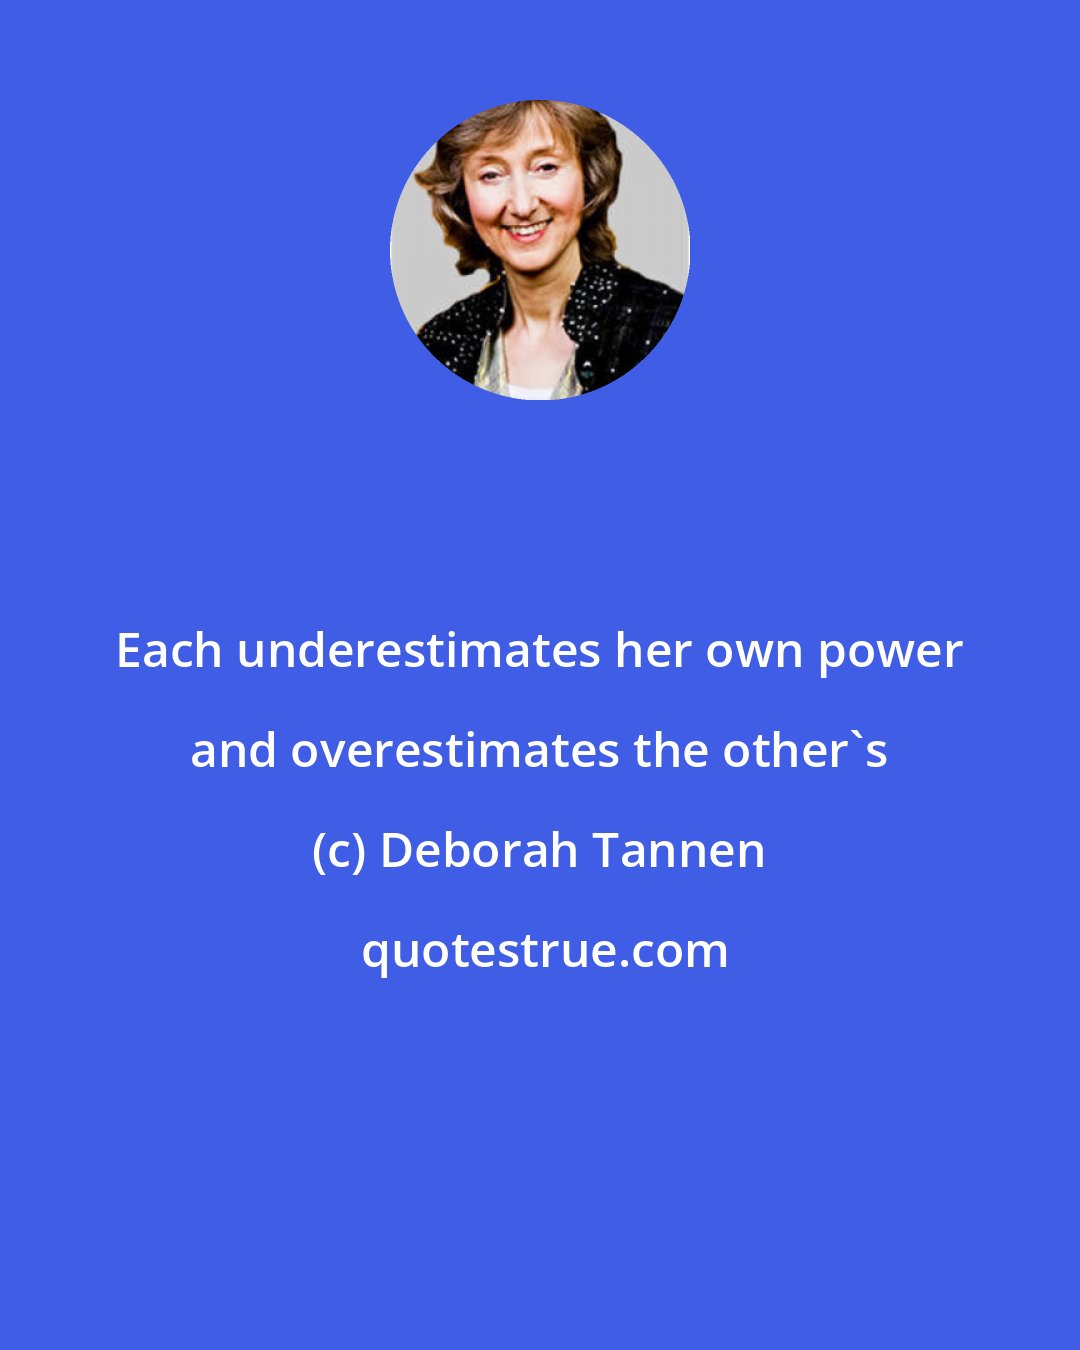 Deborah Tannen: Each underestimates her own power and overestimates the other's